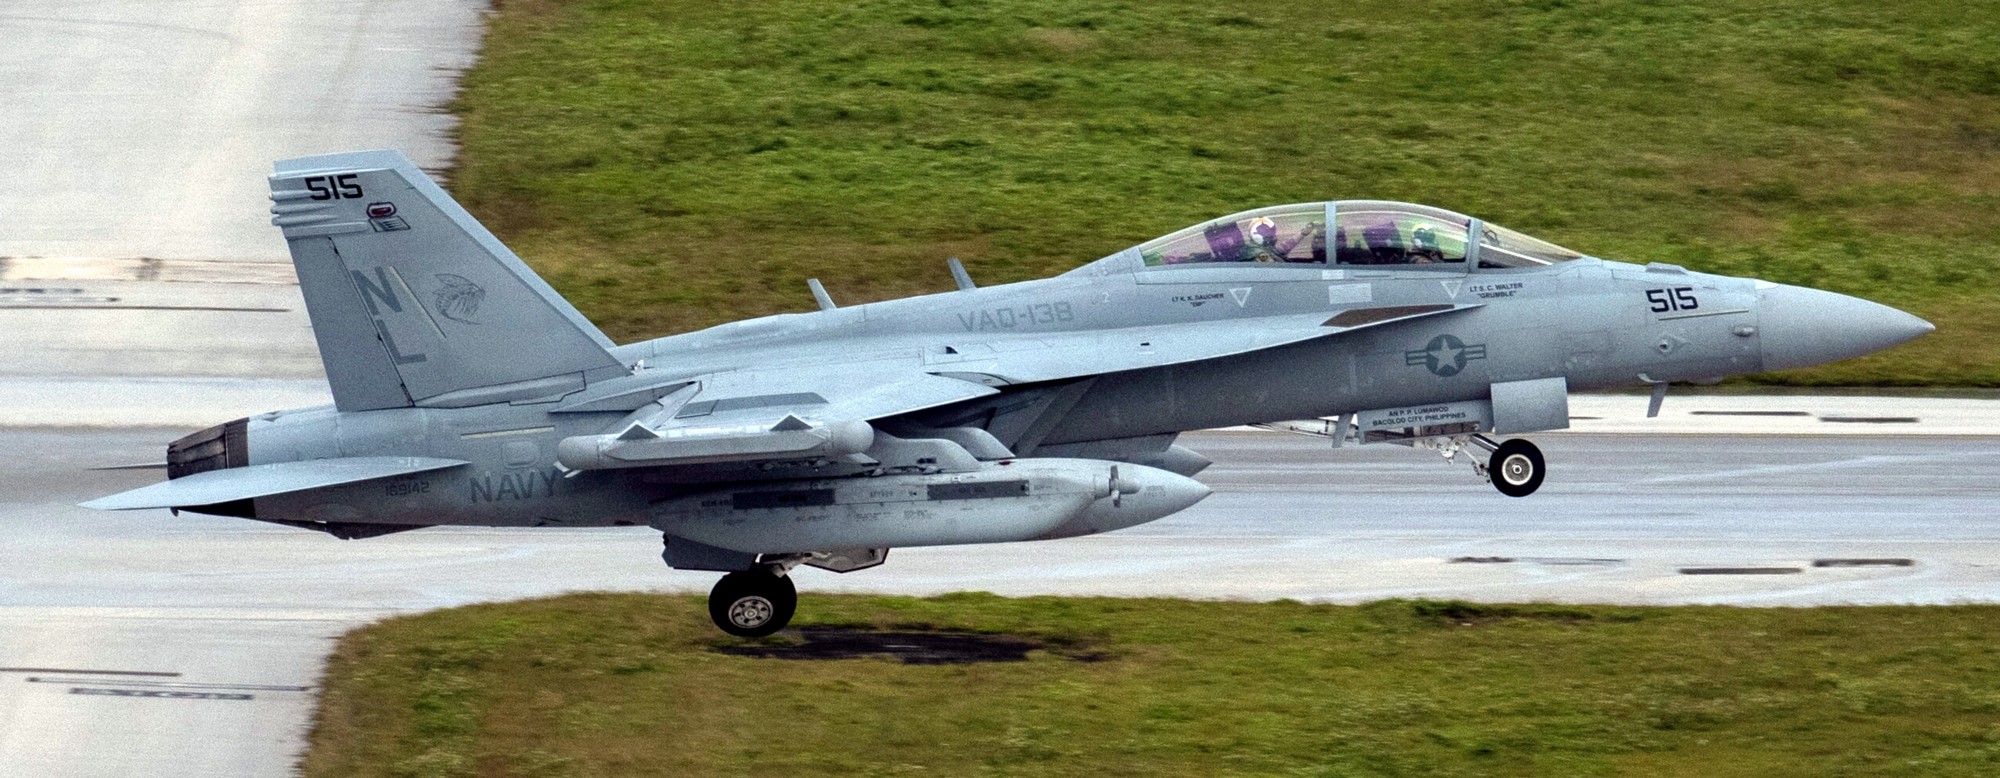 vaq-138 yellowjackets electronic attack squadron us navy boeing ea-18g growler 59 andersen afb guam